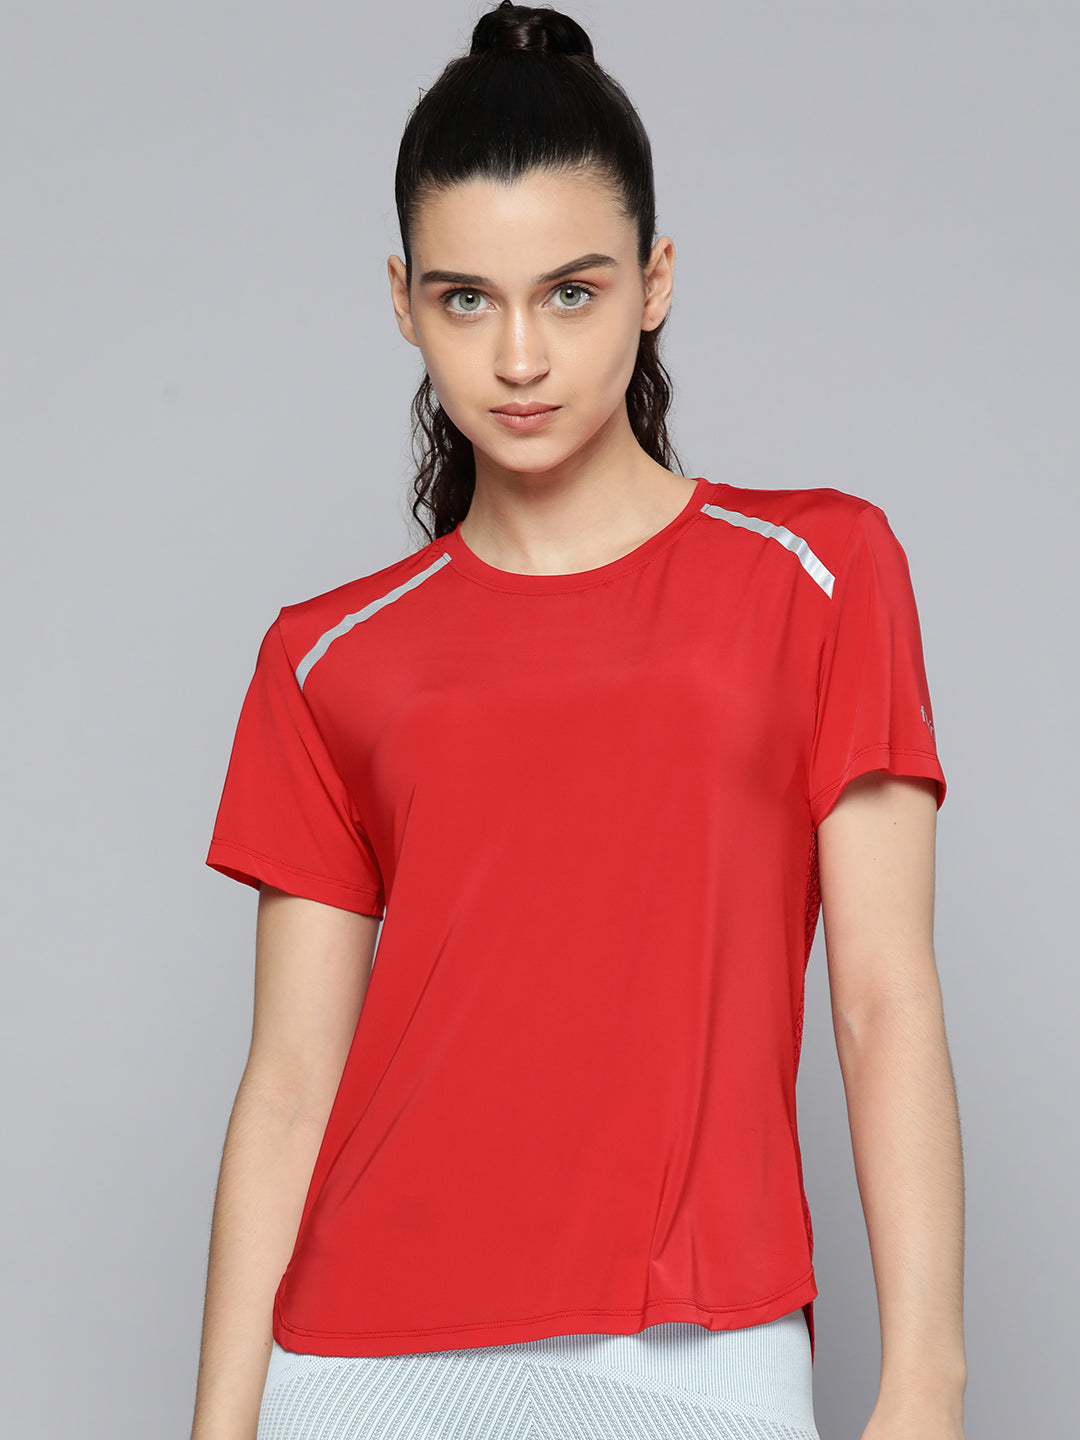 Fitkin Women Red Solid Back Key Hole Design T-shirt